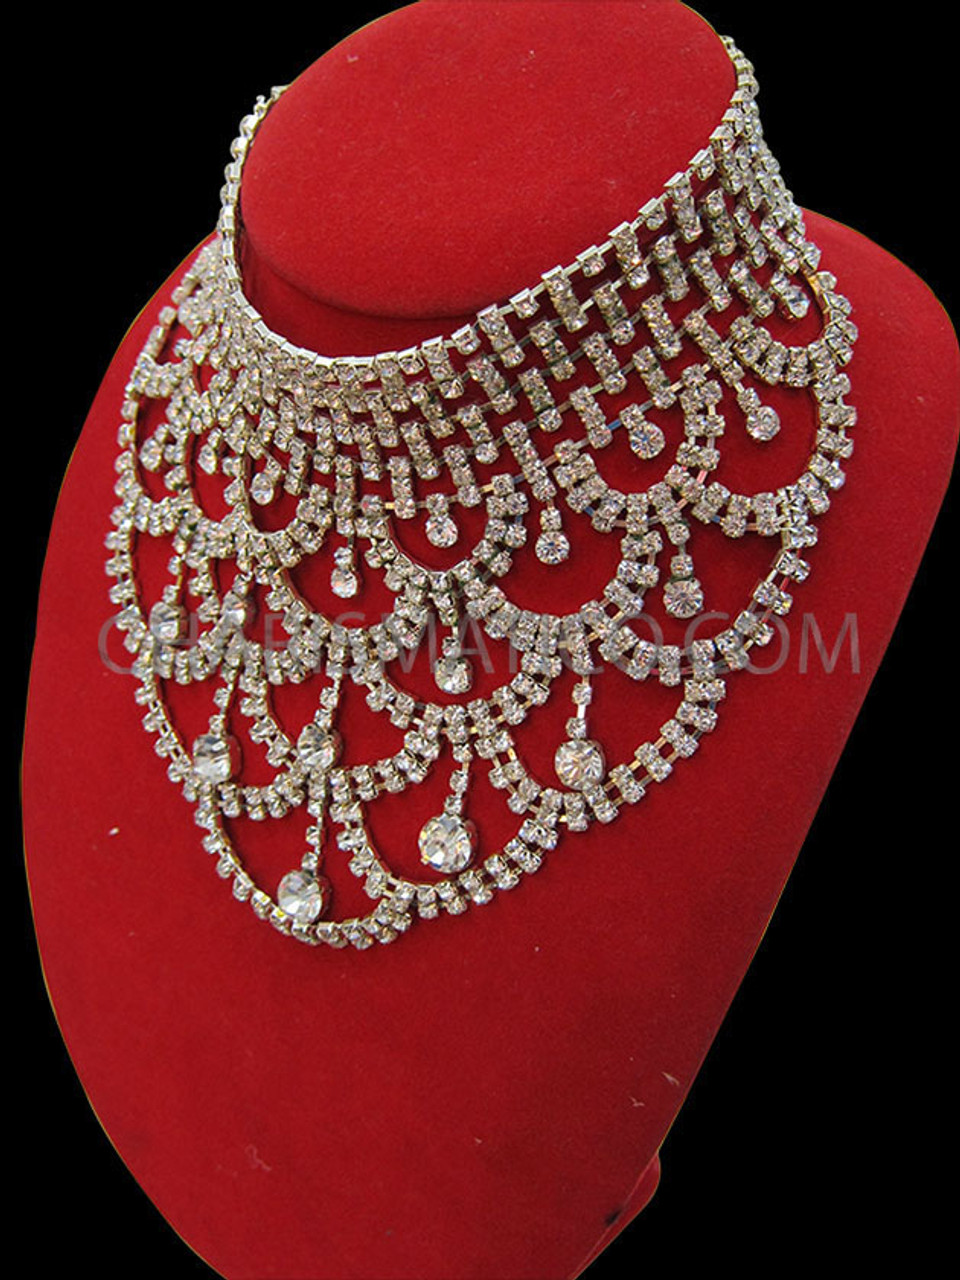 High Collar Style Fish Scale Rhinestone Diva's Crystal Divina Necklace